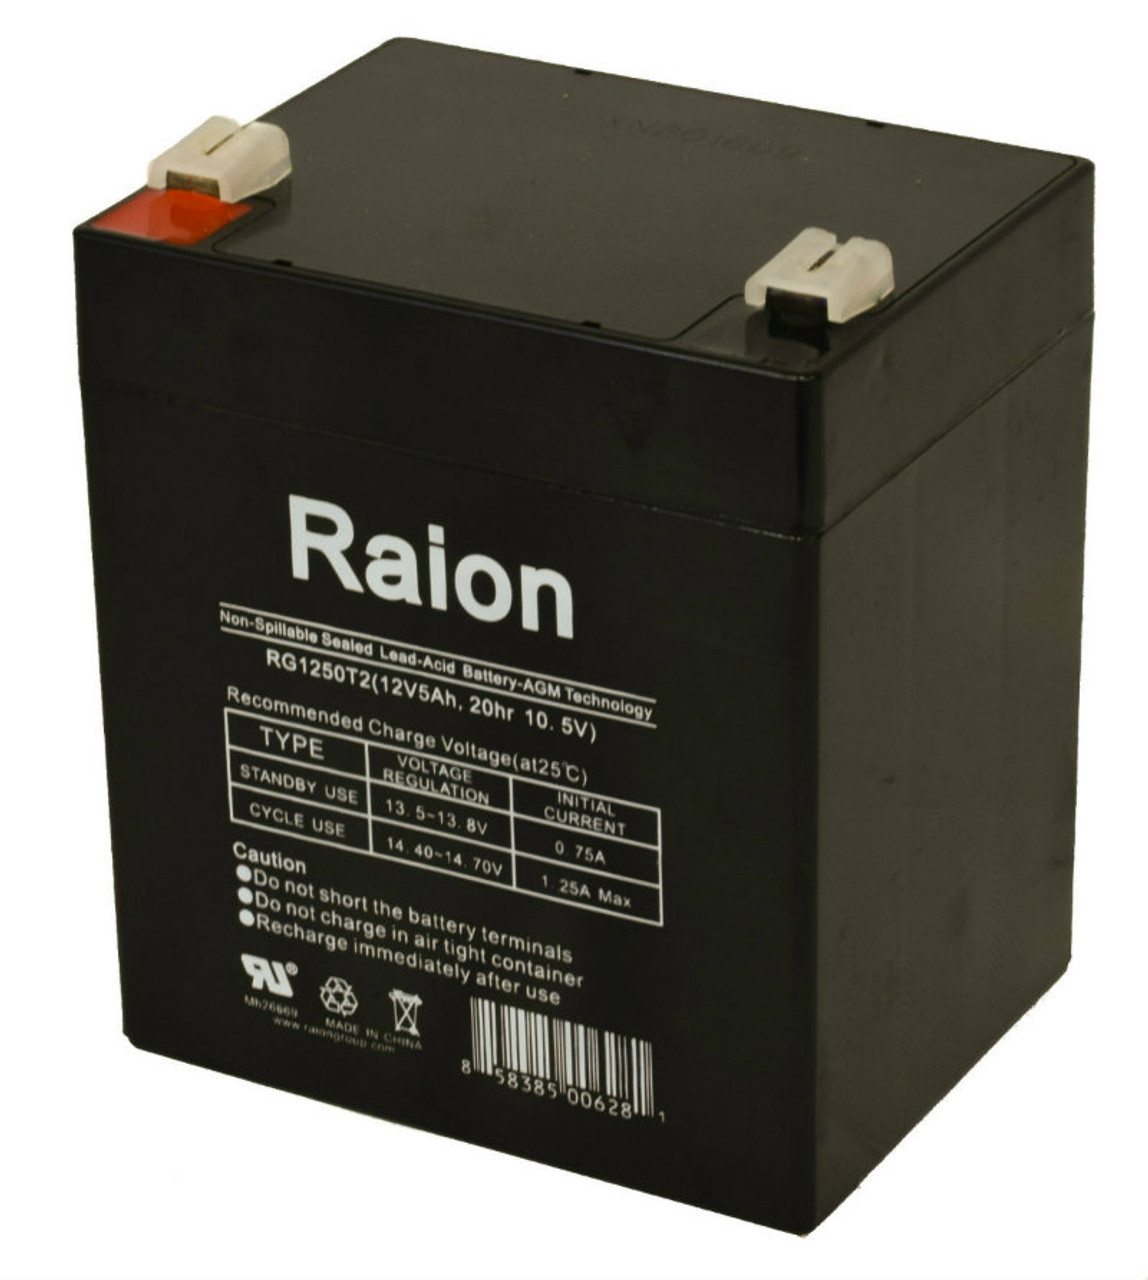 Raion Power RG1250T1 Replacement Emergency Light Battery for Silent Knight ENERJET